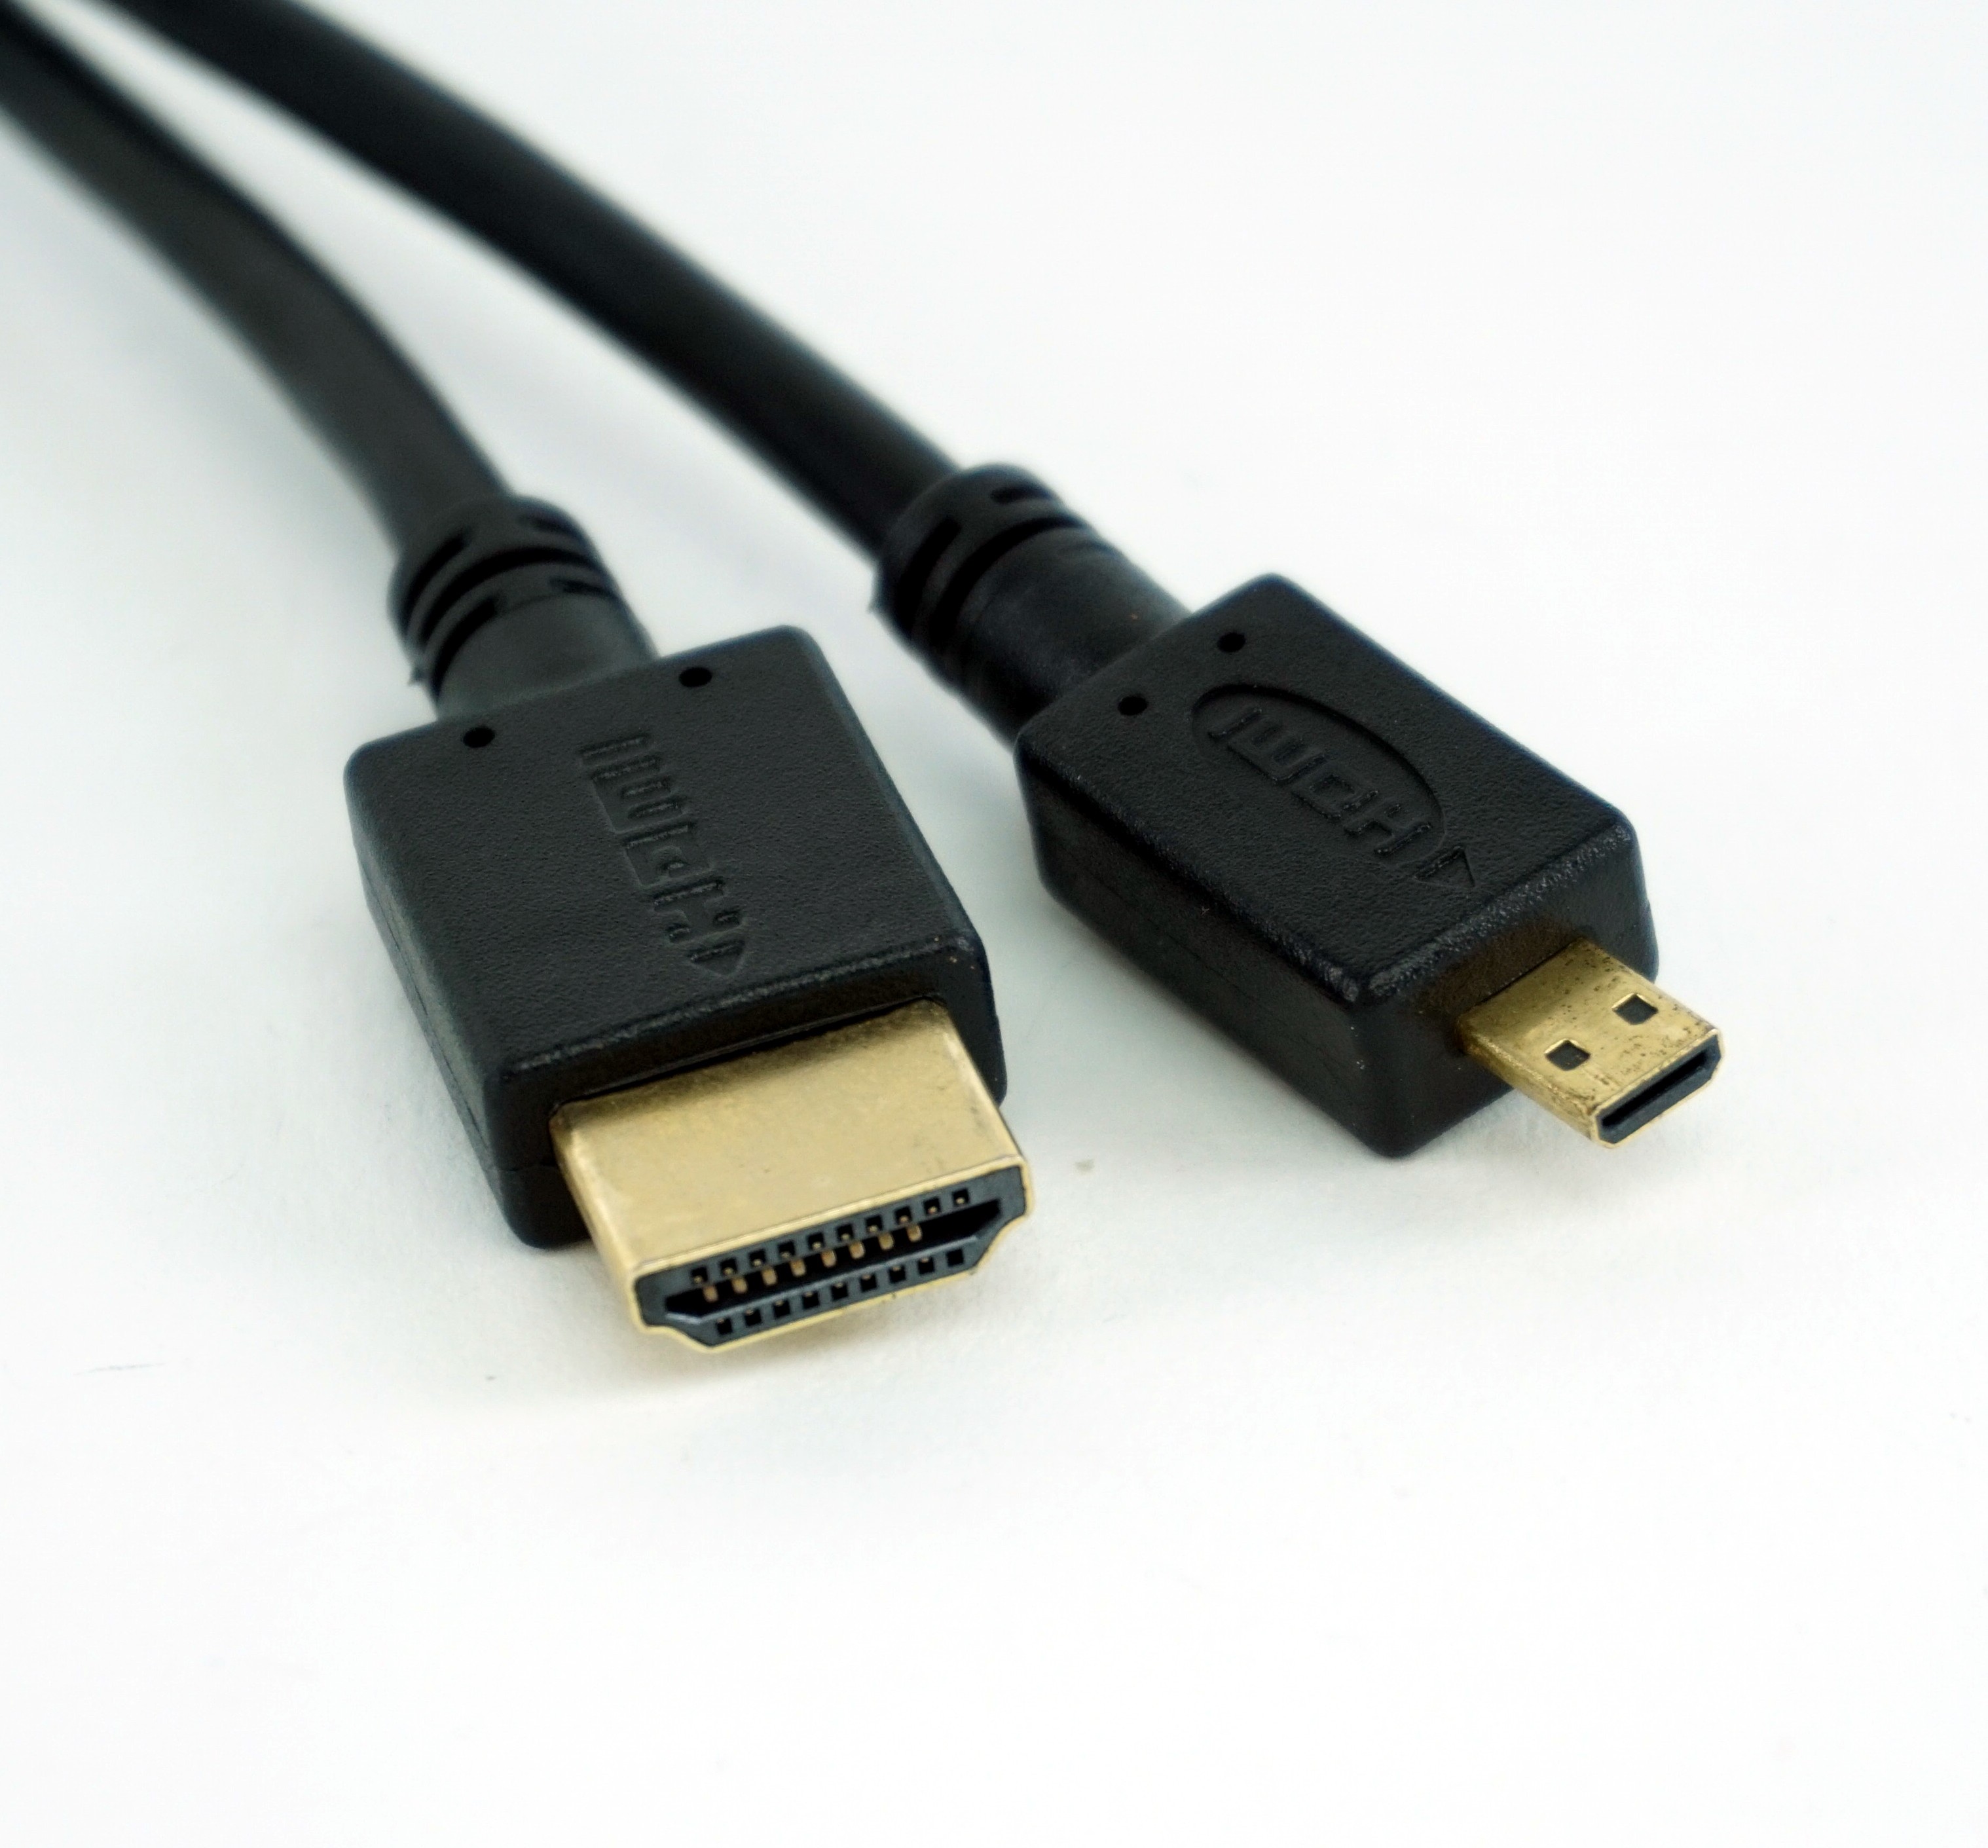 You will get better Newness Minefield Cablu HDMI - micro HDMI 1.5m - ARDUSHOP